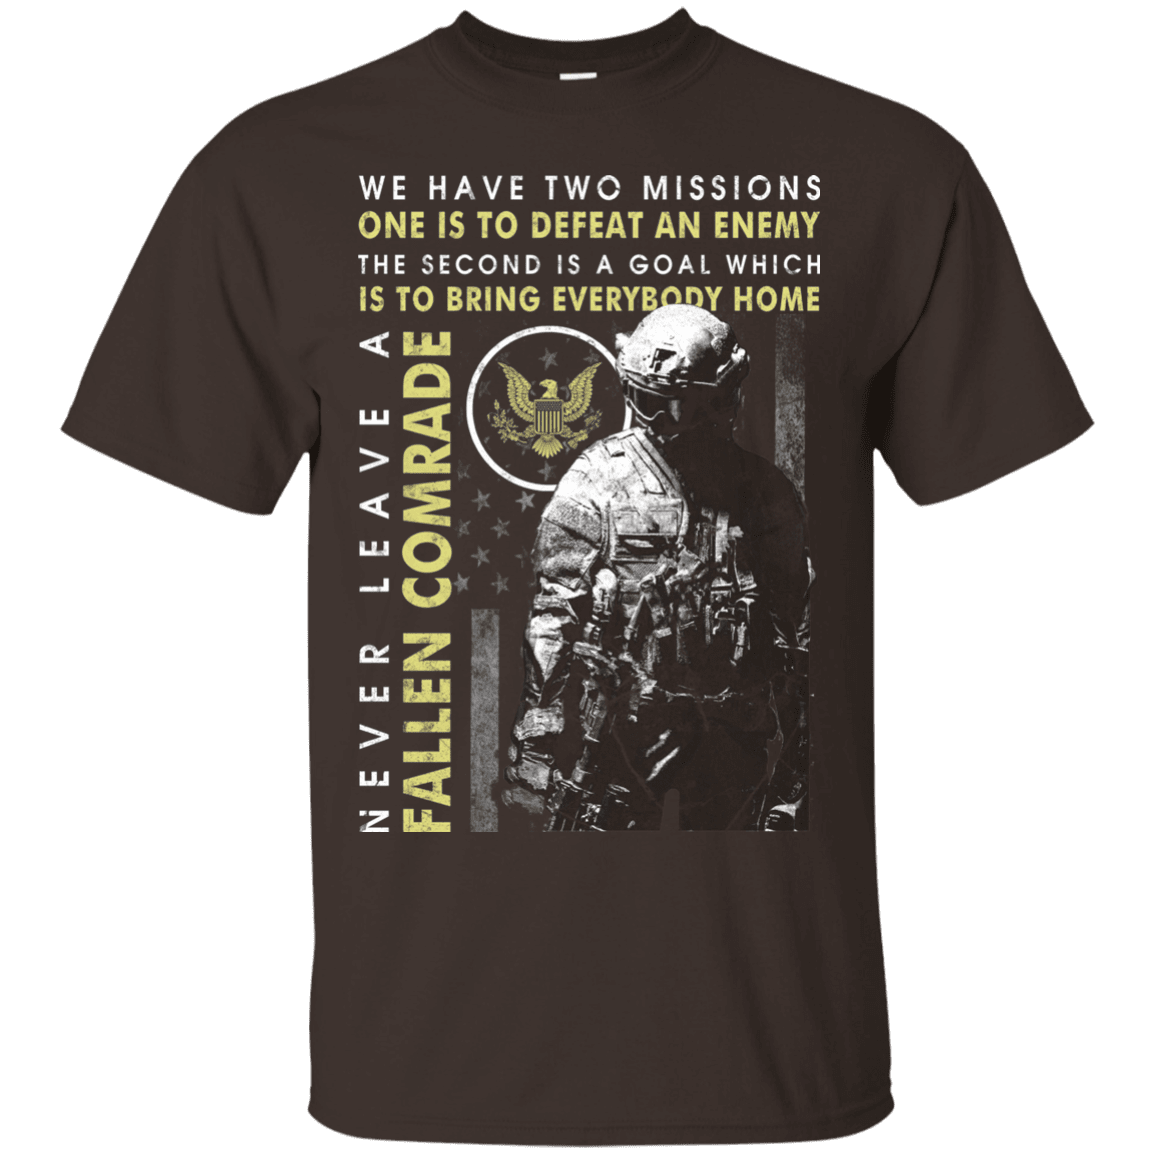 Never Leave A Fallen Comrade Army Men Front T Shirts-TShirt-Army-Veterans Nation